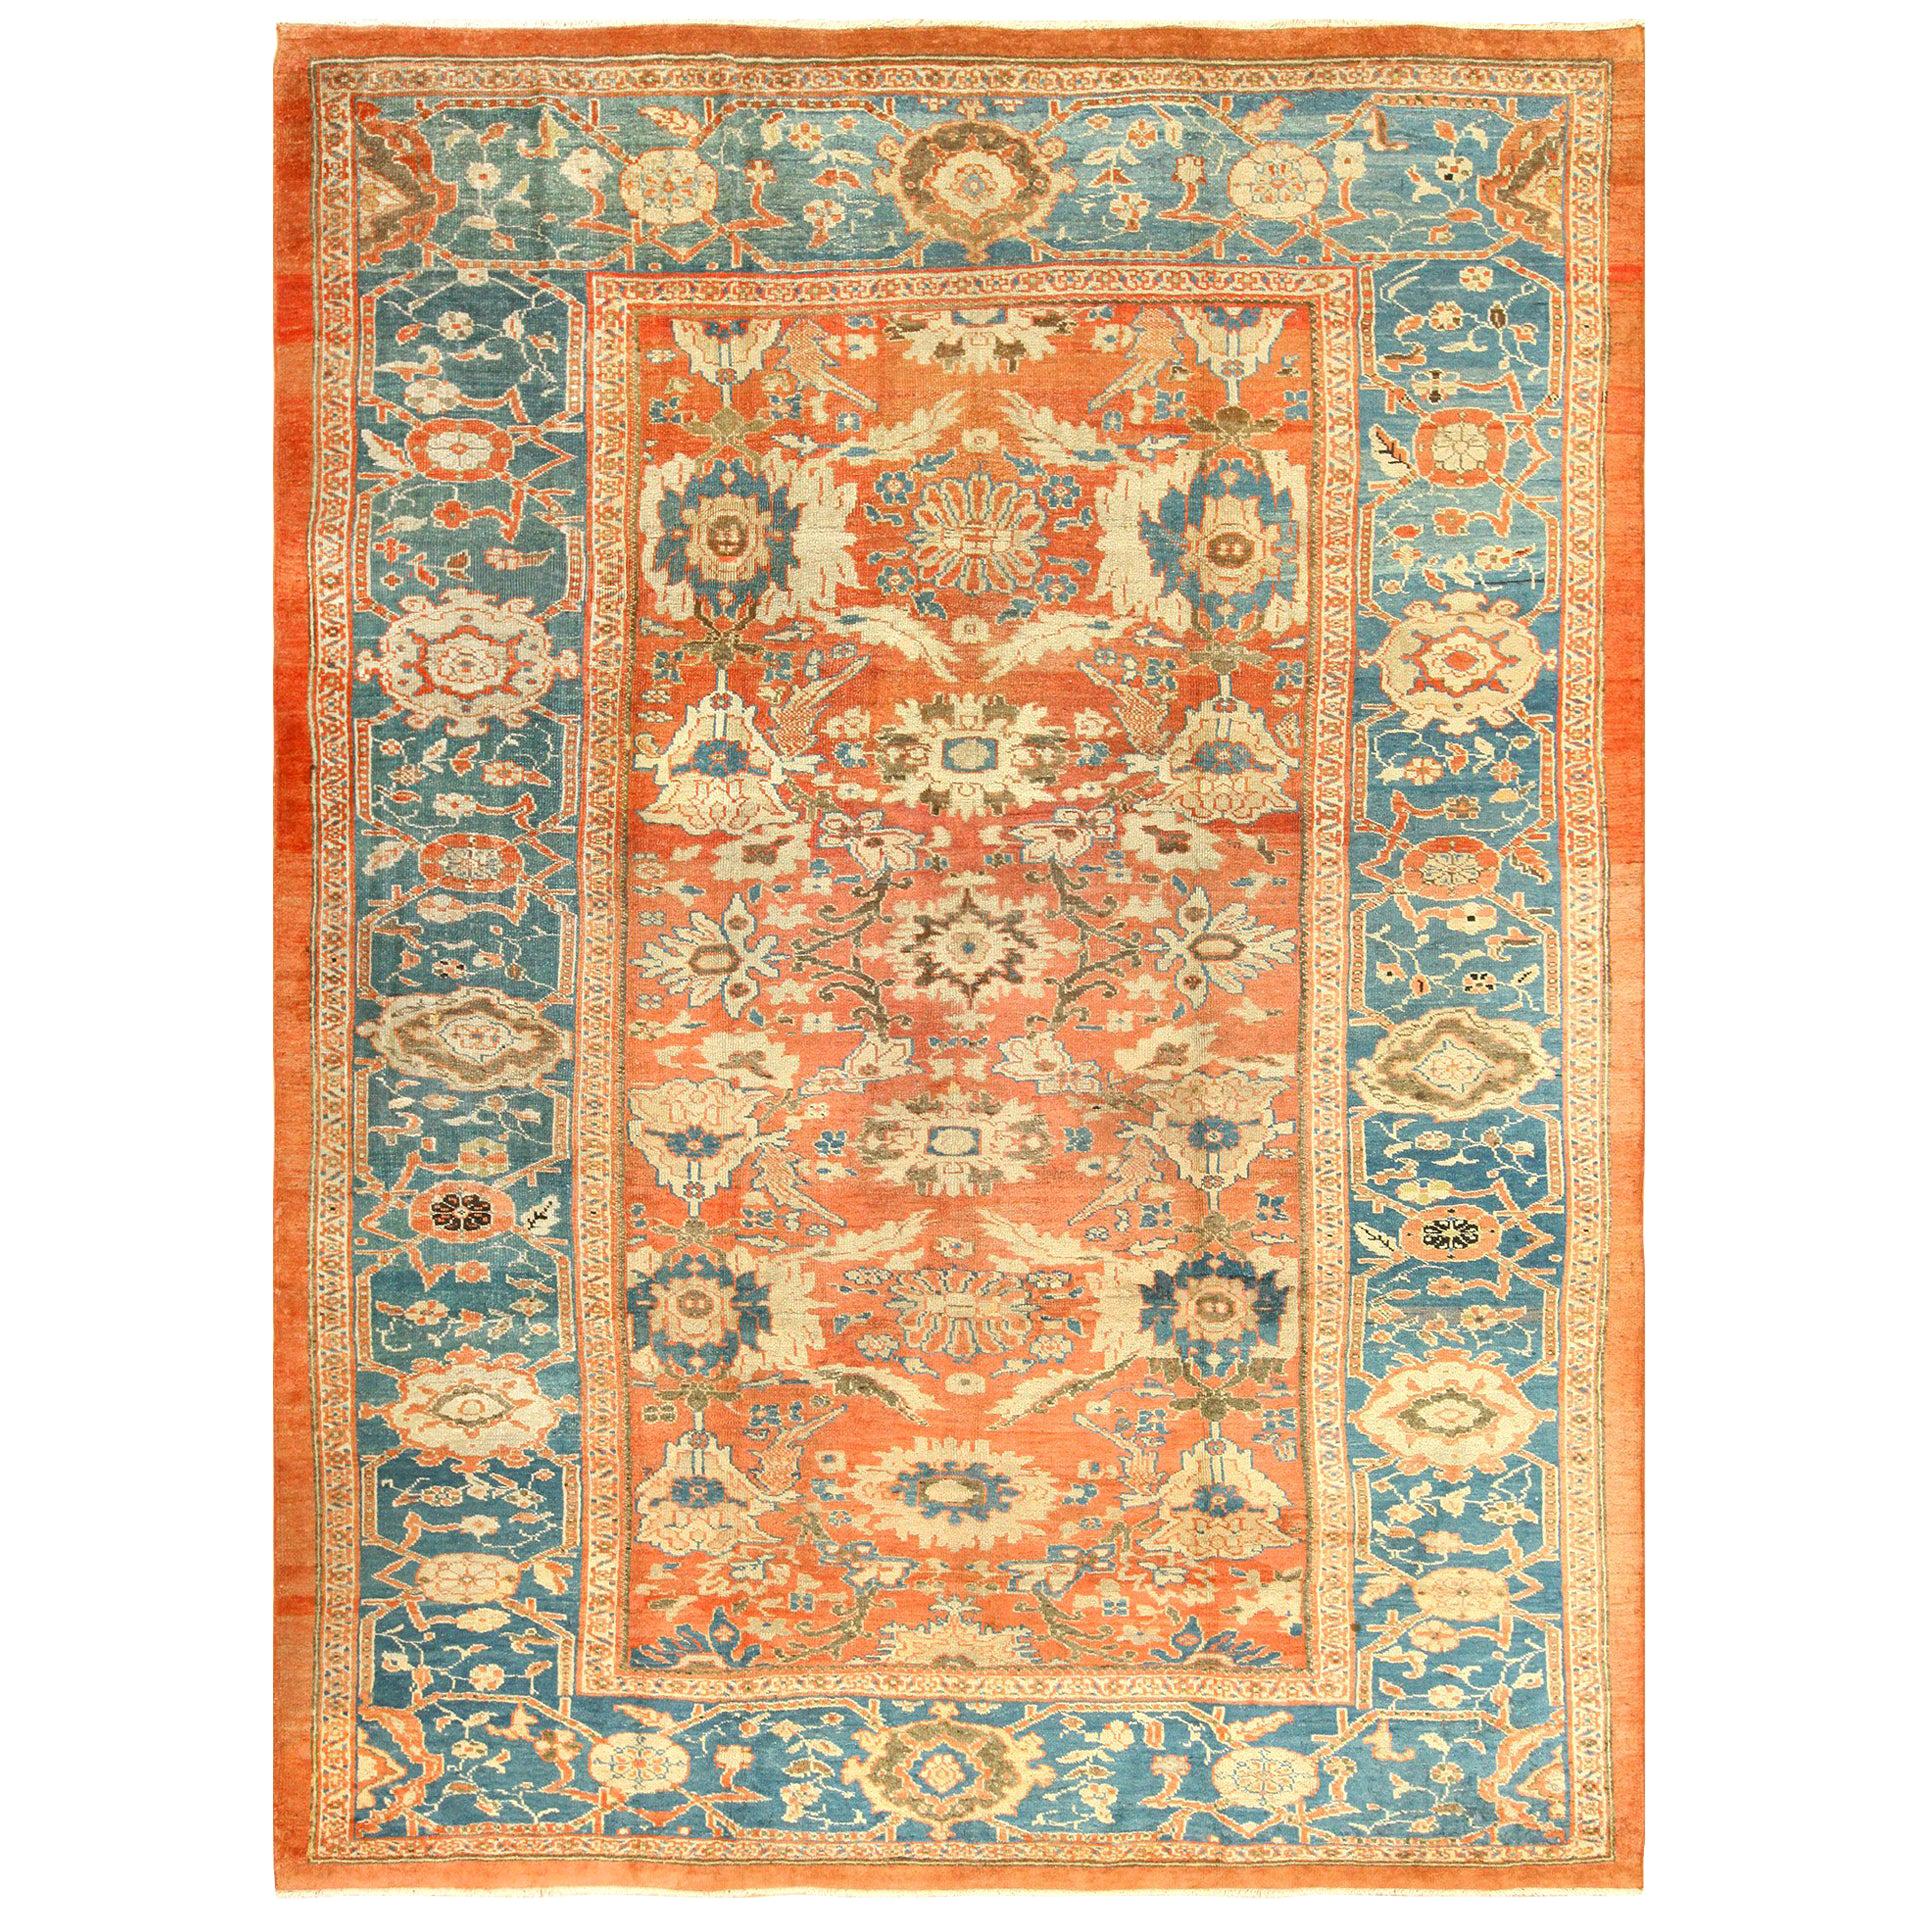 Room Size Antique Sultanabad Persian Rug. Size: 10 ft 4 in x 14 ft 